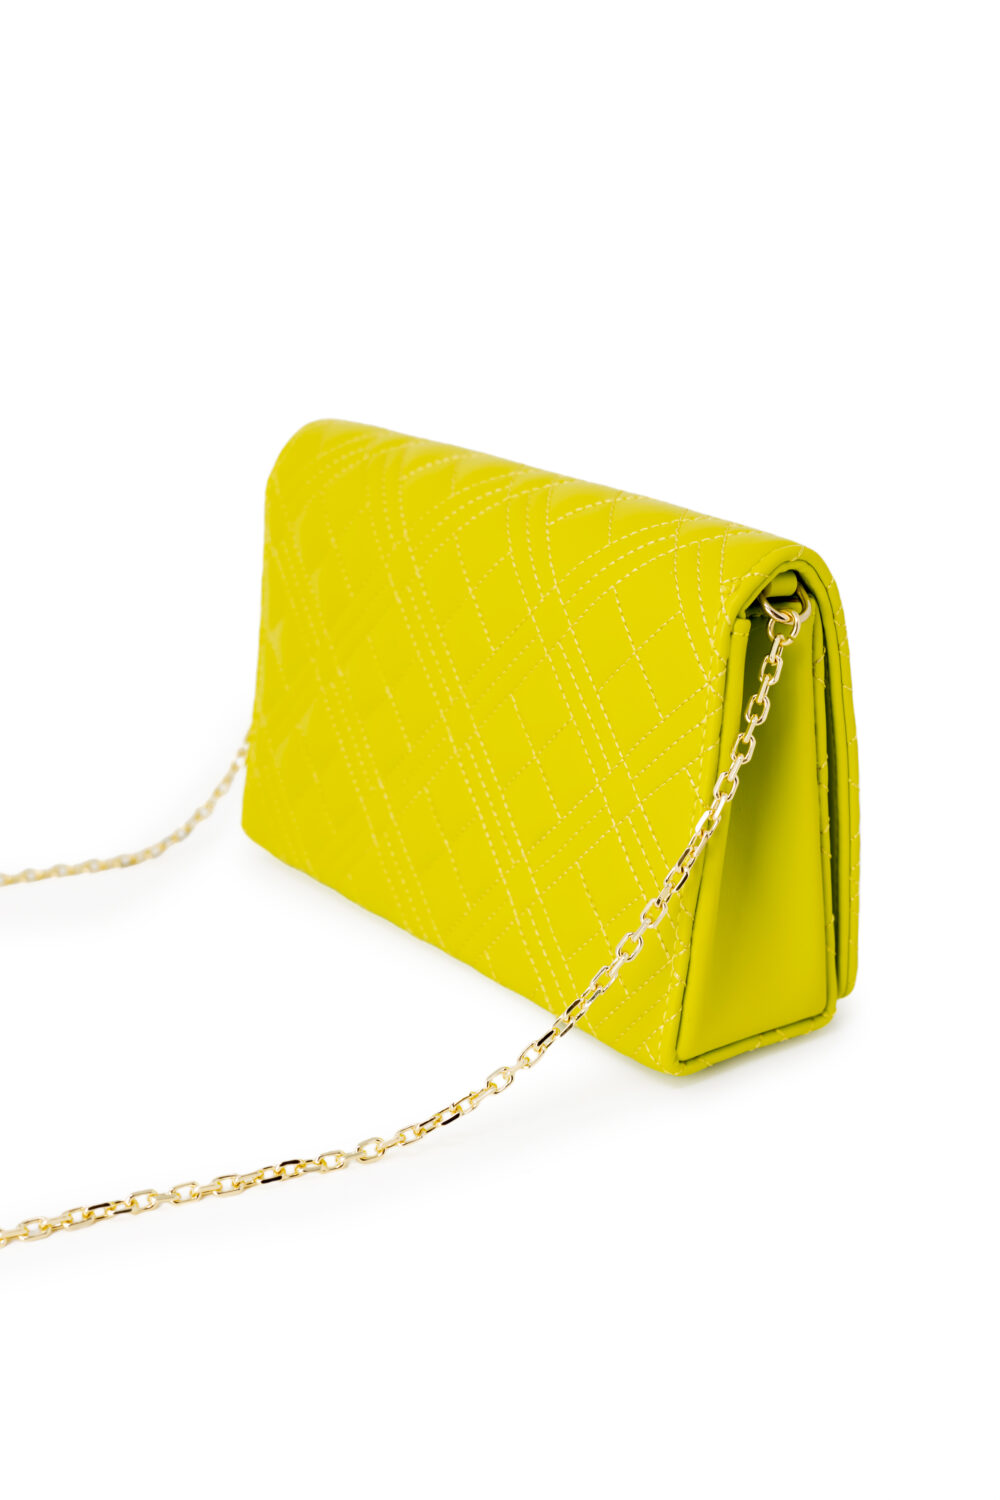 Borsa Love Moschino quilted Giallo lime - Foto 2